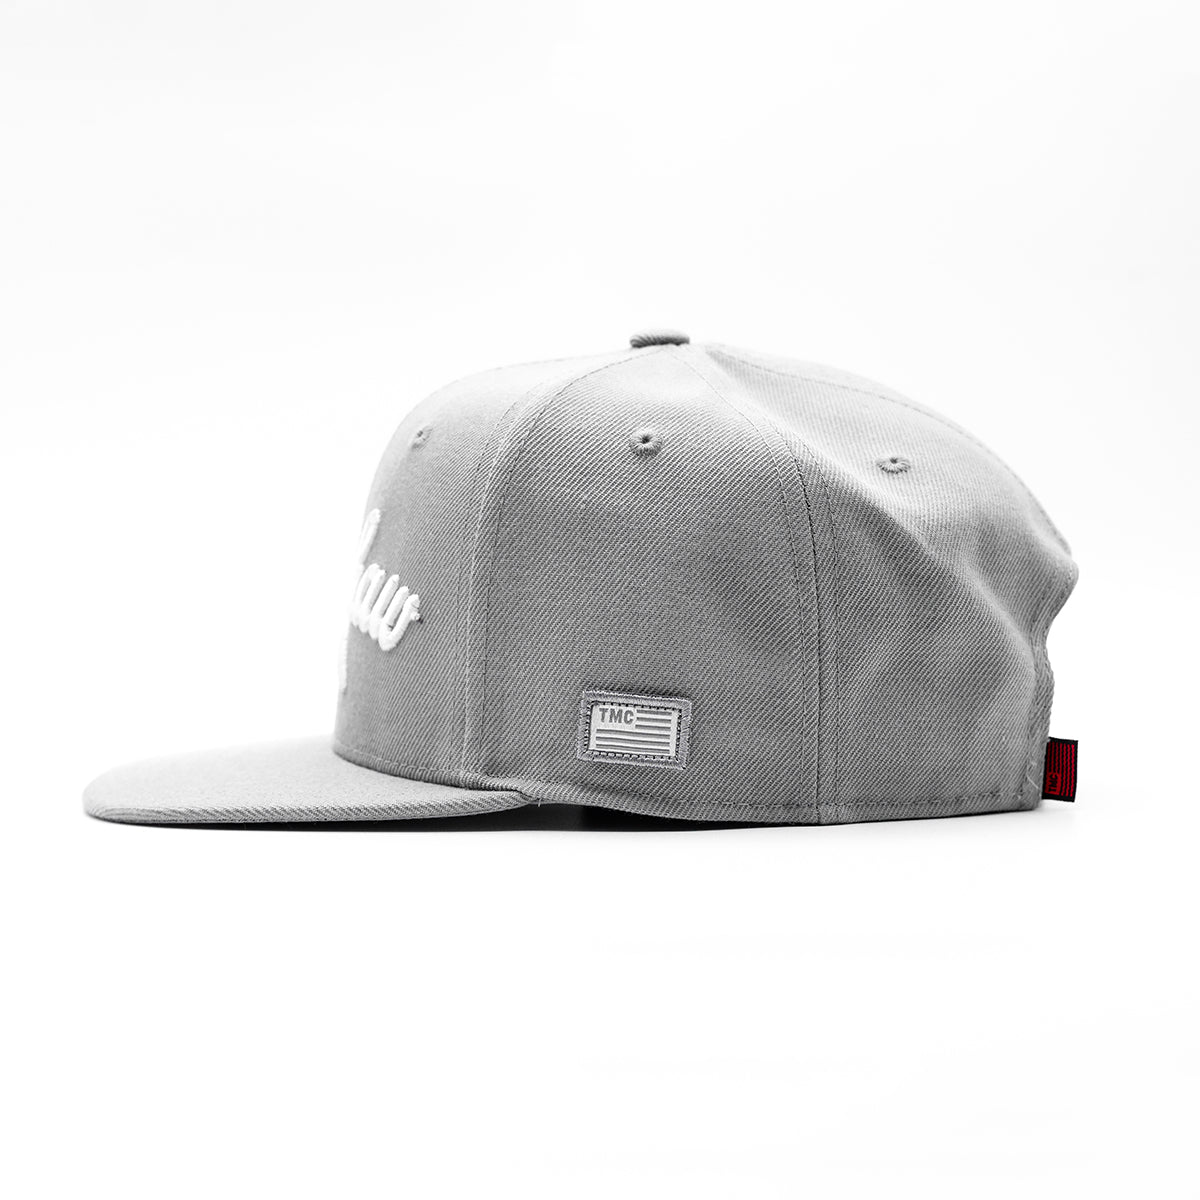 Crenshaw Limited Edition Snapback - Heather/White - Side